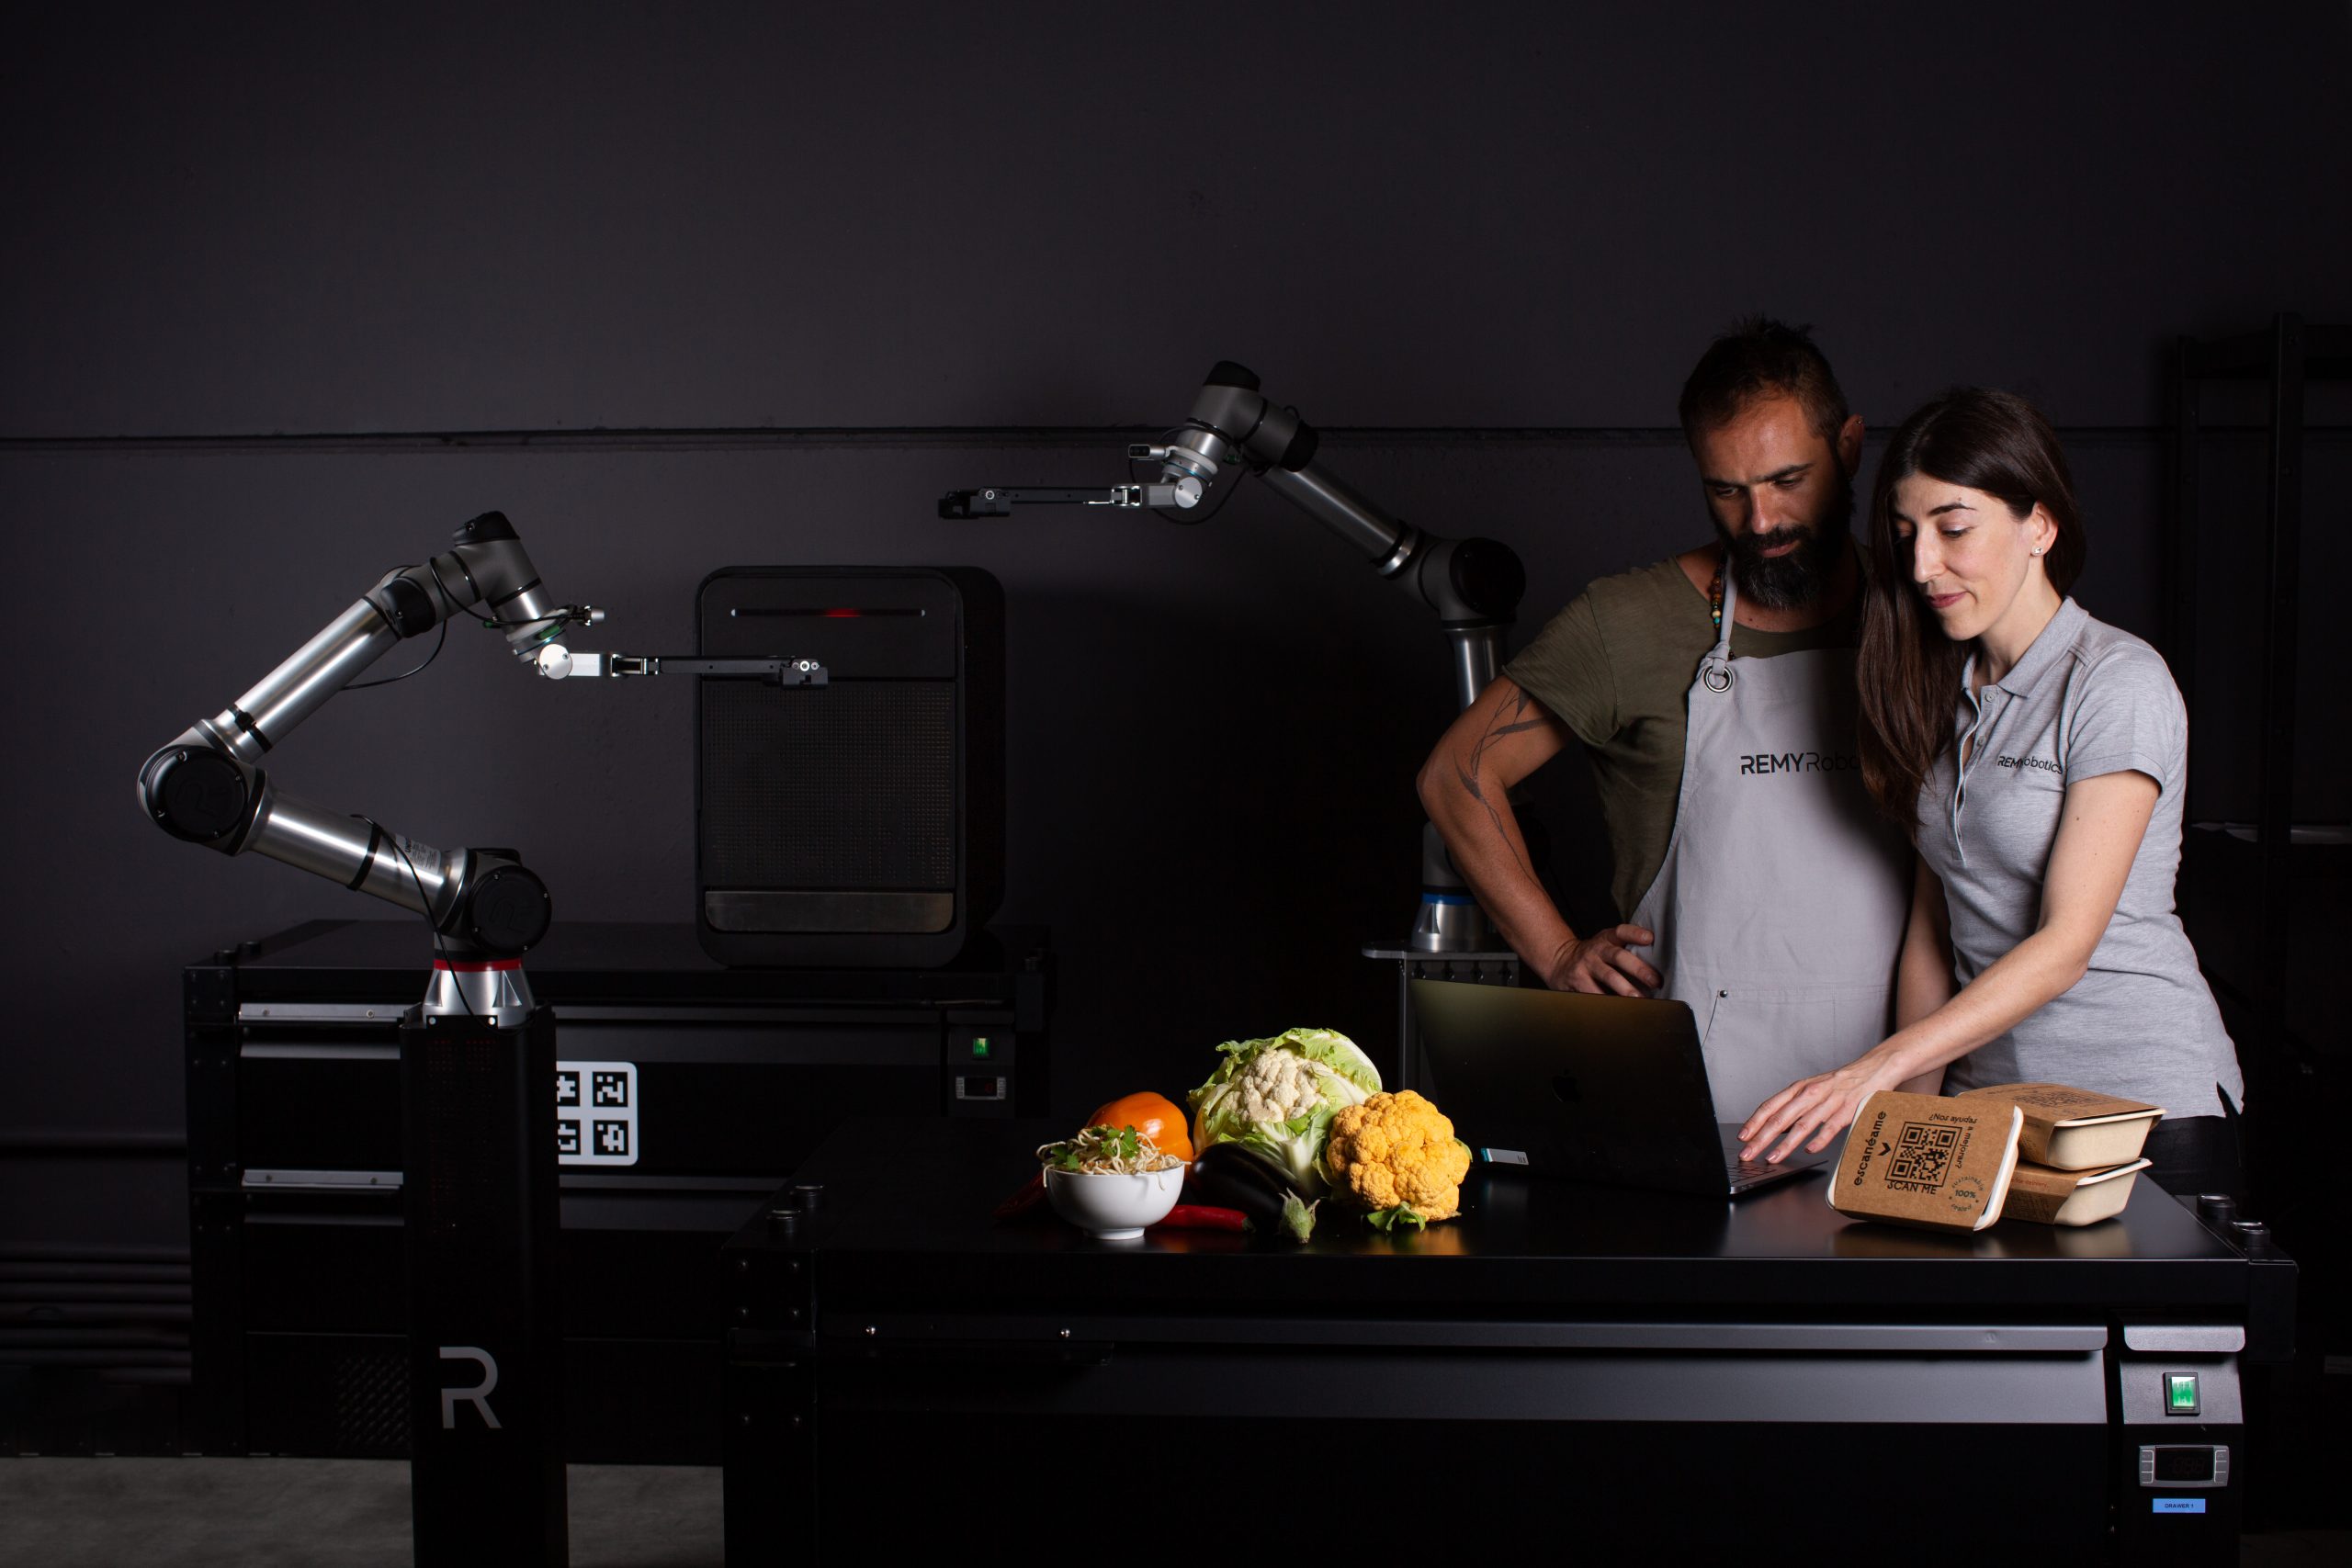 Look tasty? Food cooked by robots…